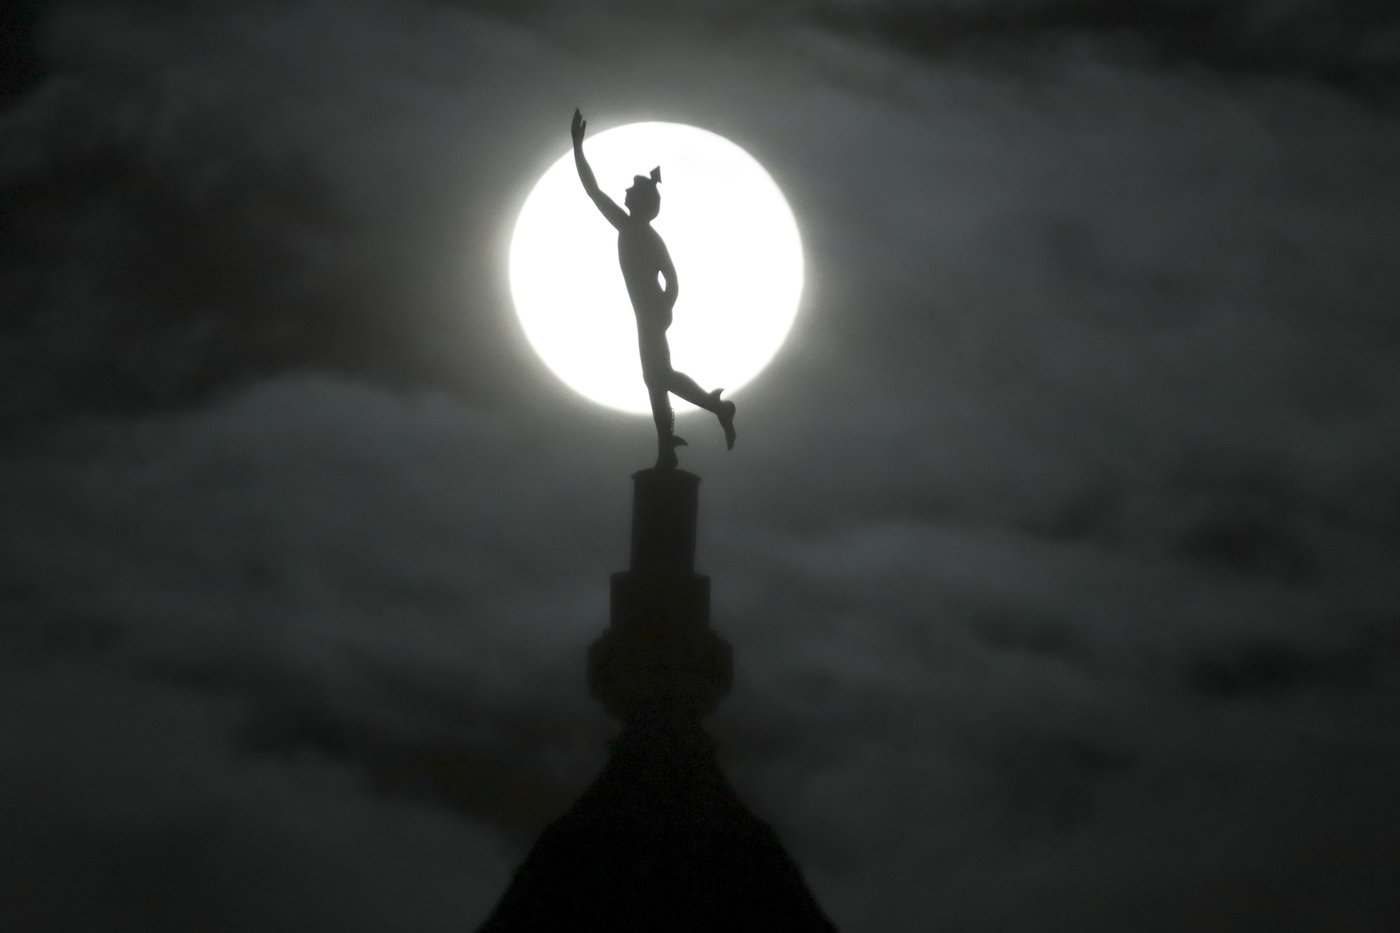 A supermoon rises behind a statue of the Roman god Mercury mounted on top of a hotel tower, Tuesday, April 7, 2020, in Nashville, Tenn. (AP Photo/Mark Humphrey)